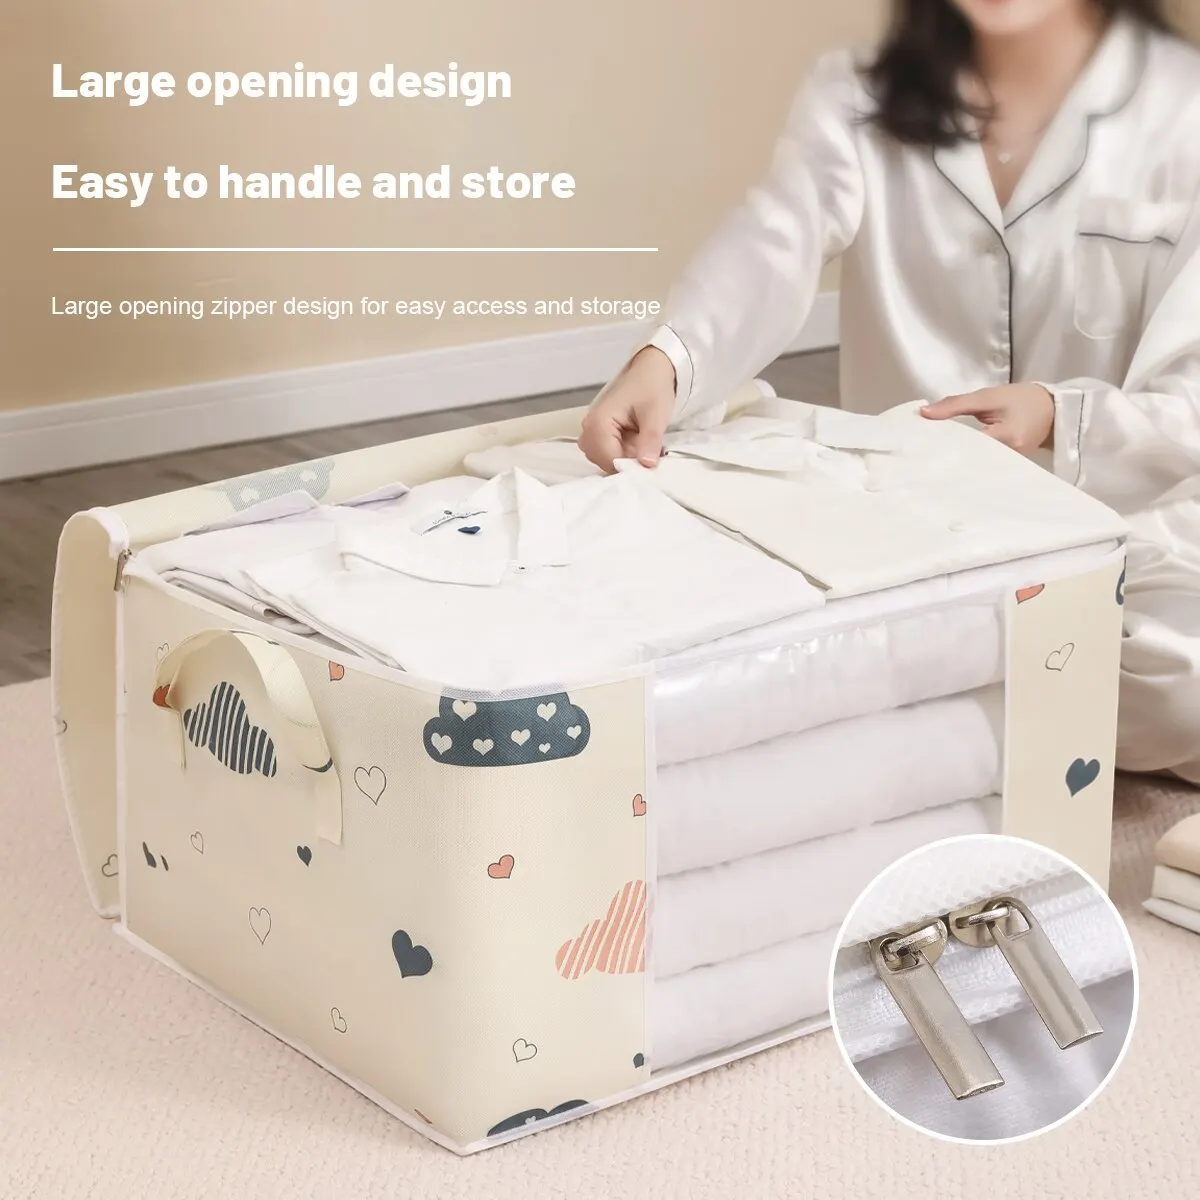 Jumbo Size Clear Flexible Zipper Storage Bags Organizer, for Clothes,  Bedding, Quilts, Blankets, Flexible Thick Plastic Totes for Easy and  Convenient